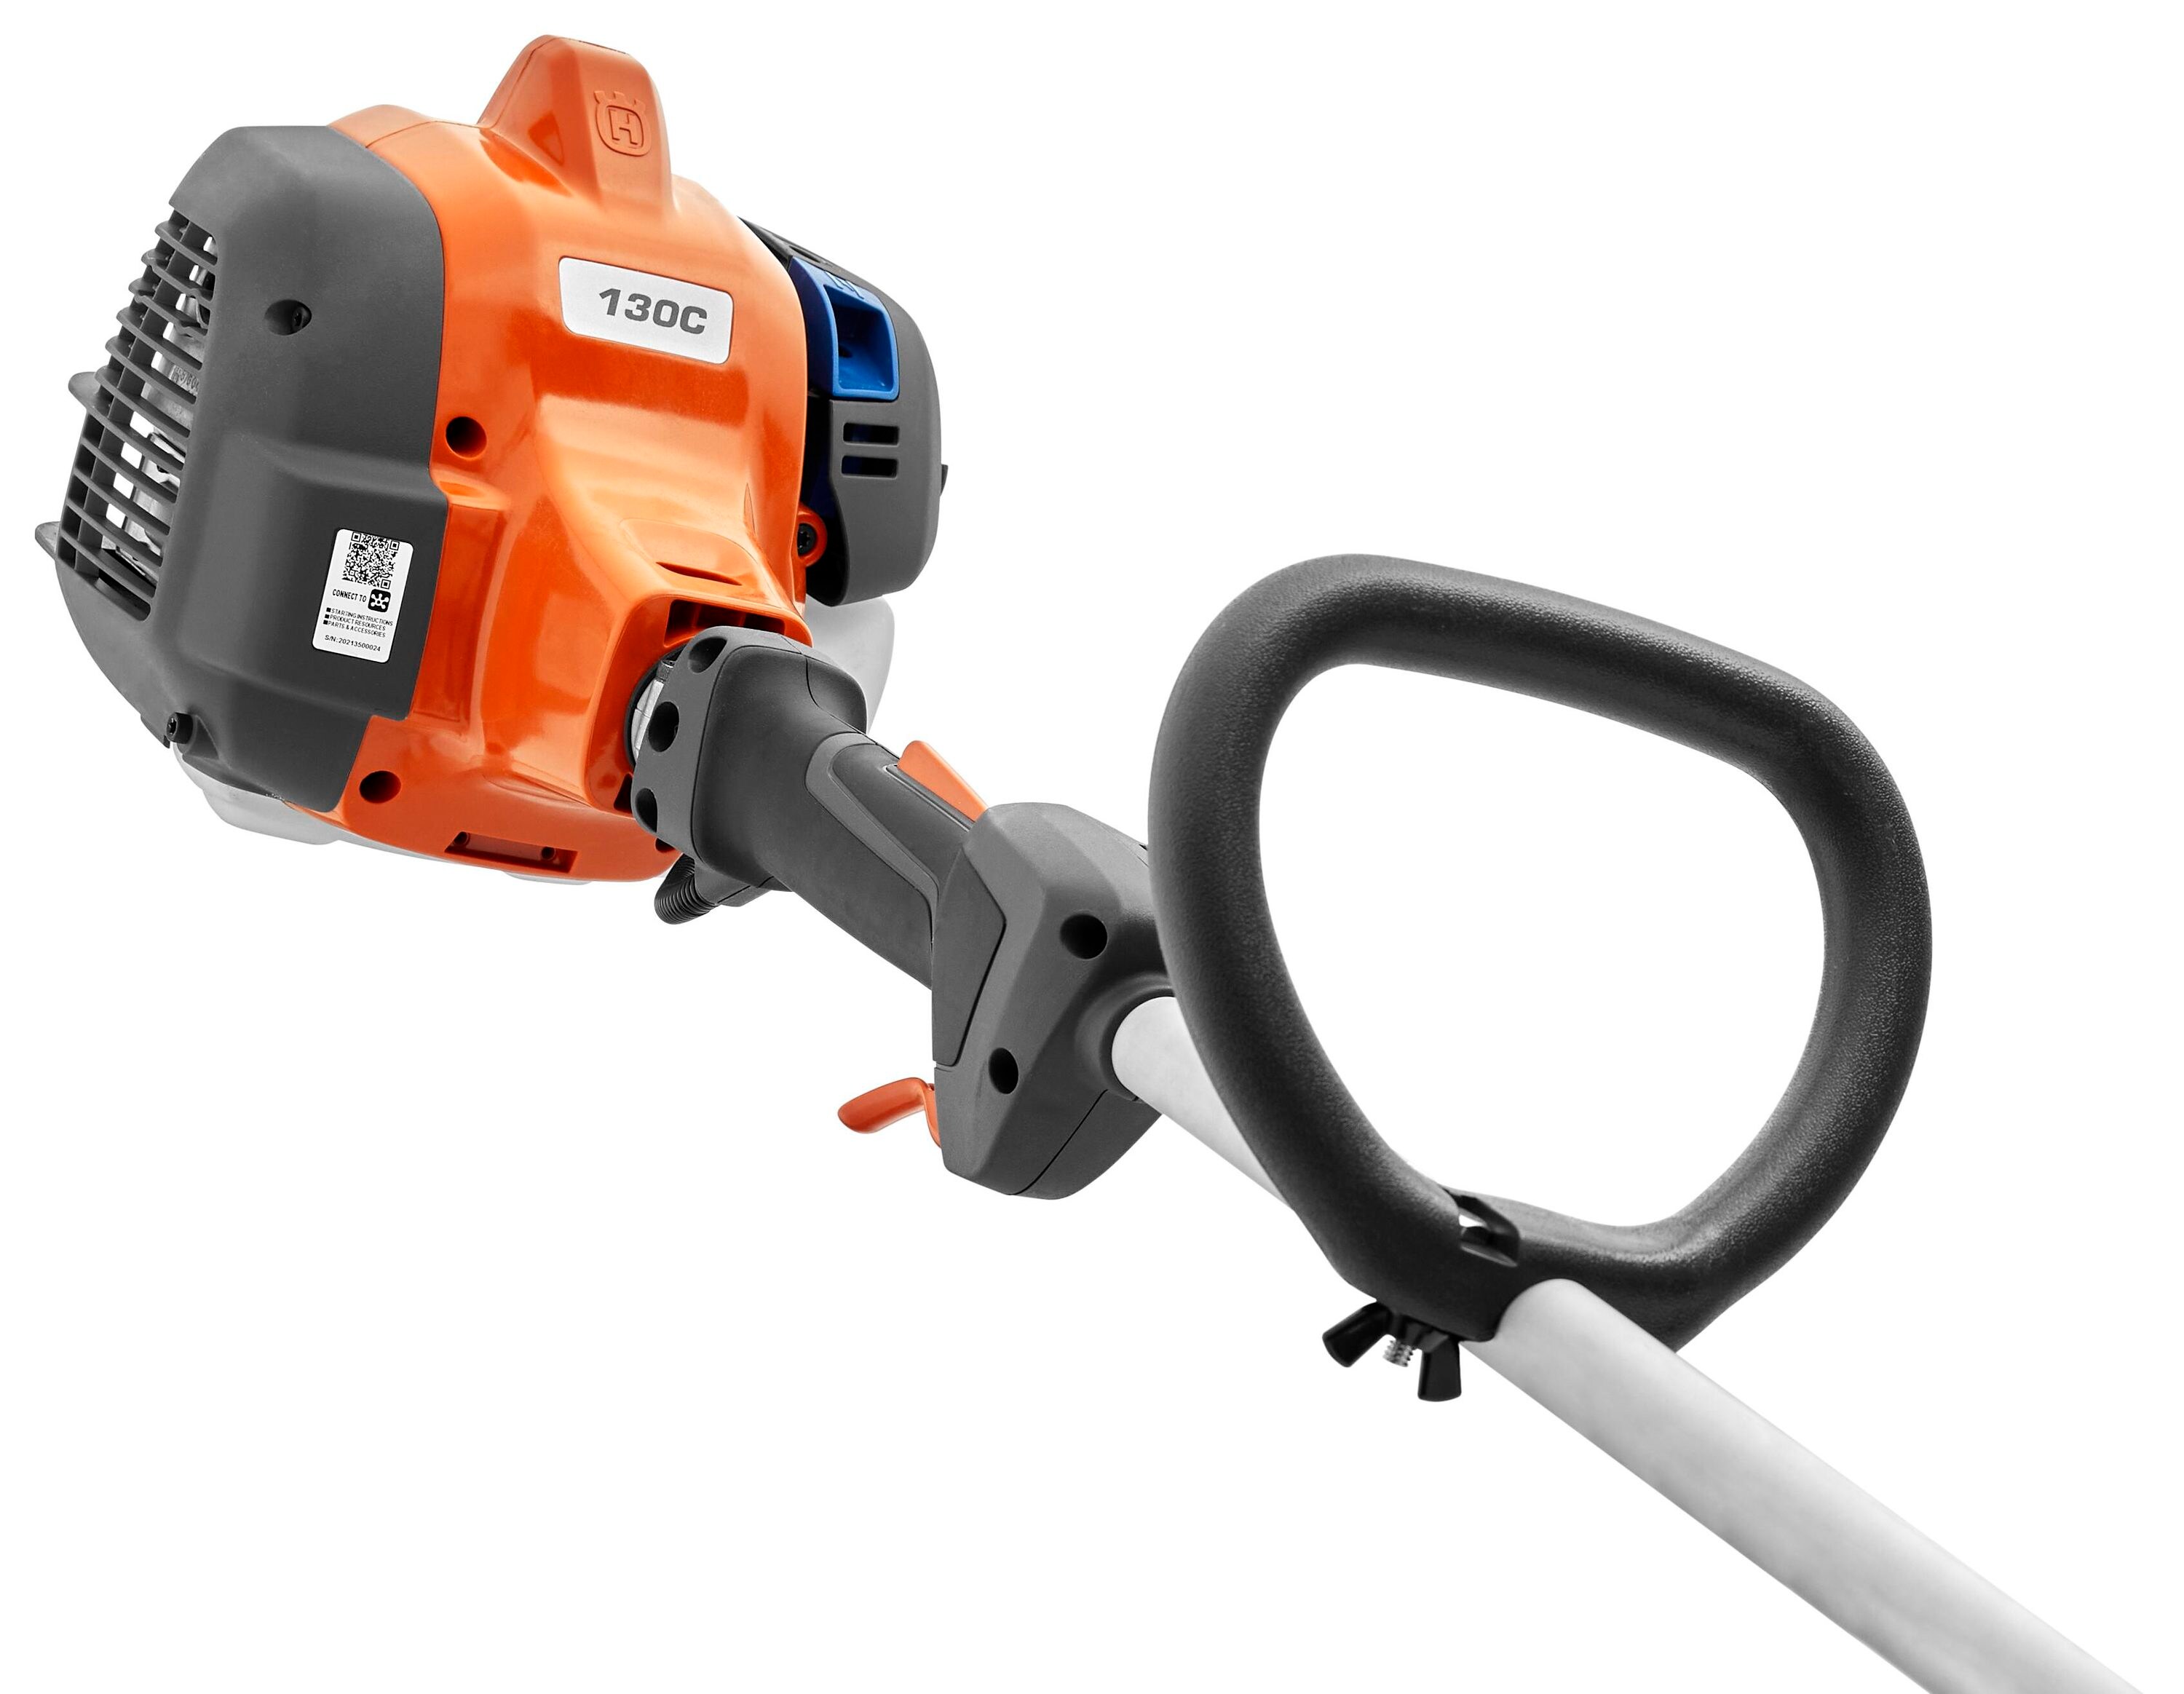 Husqvarna 130C 28-cc 2-cycle 17-in Curved Shaft Gas String Trimmer - 3